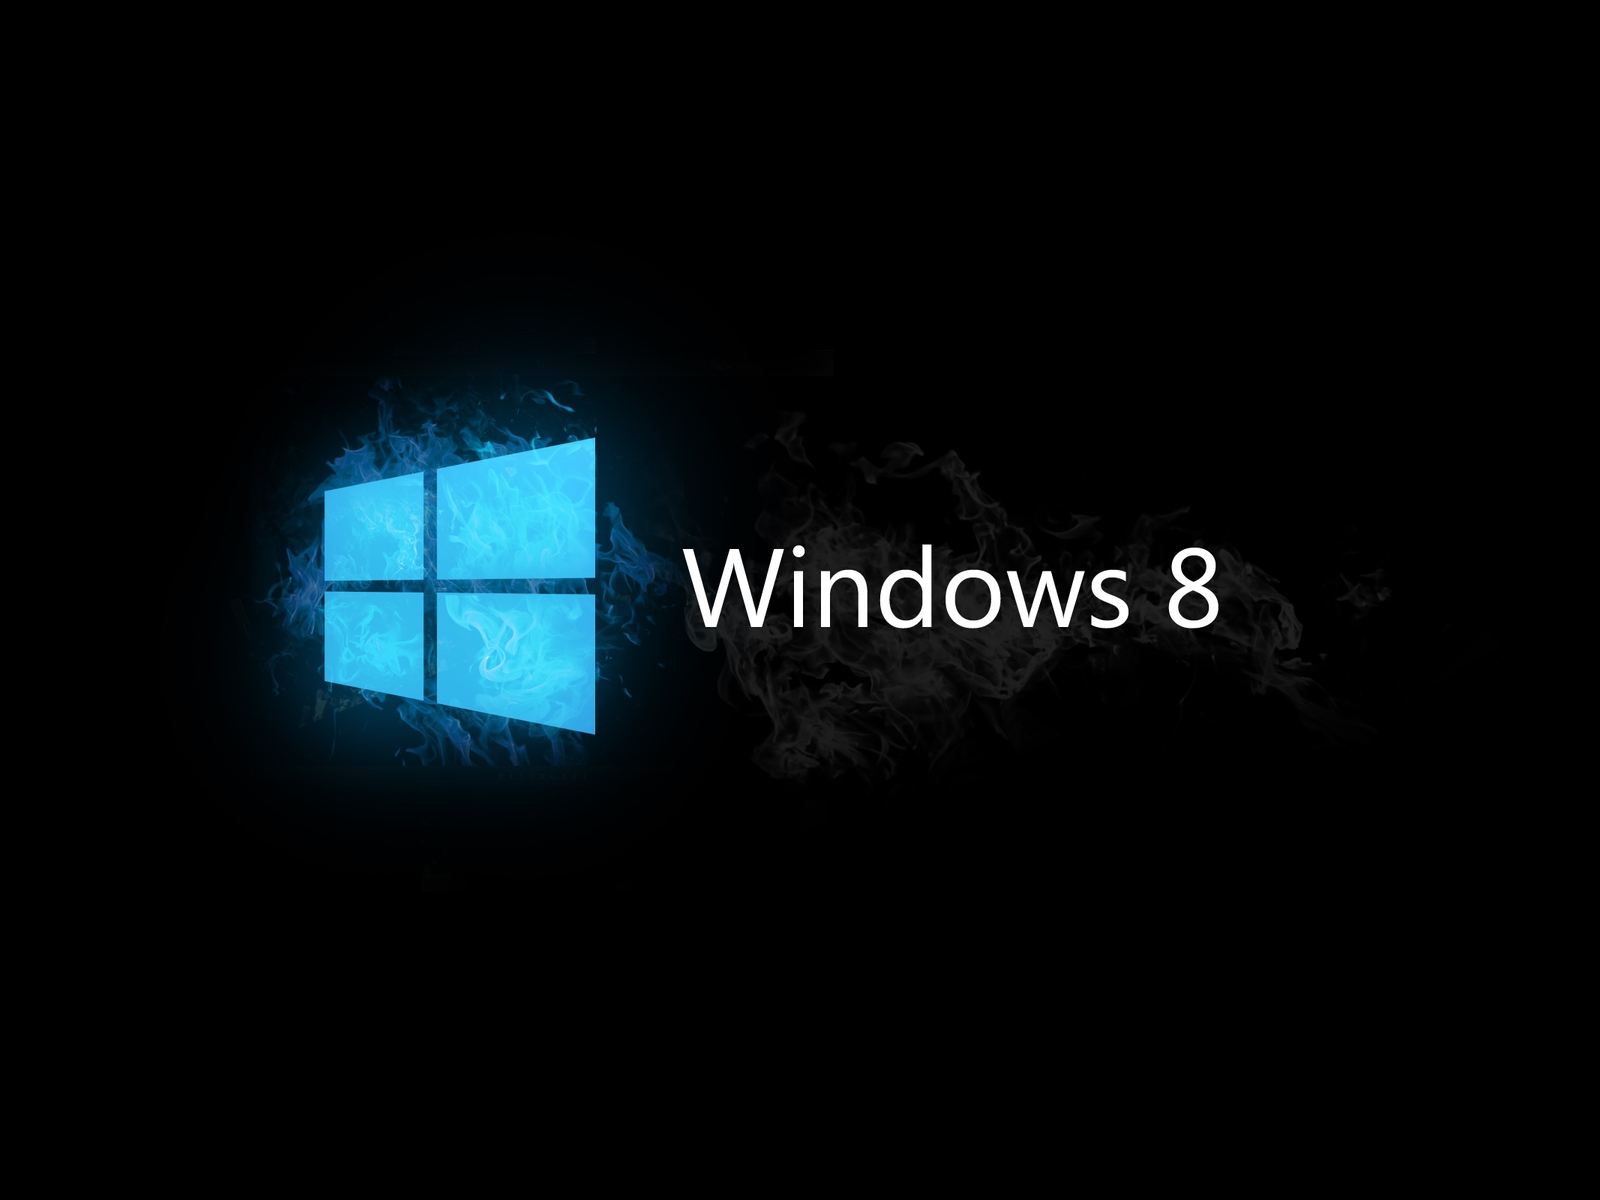 Windows 8 Blue and Black for 1600 x 1200 resolution